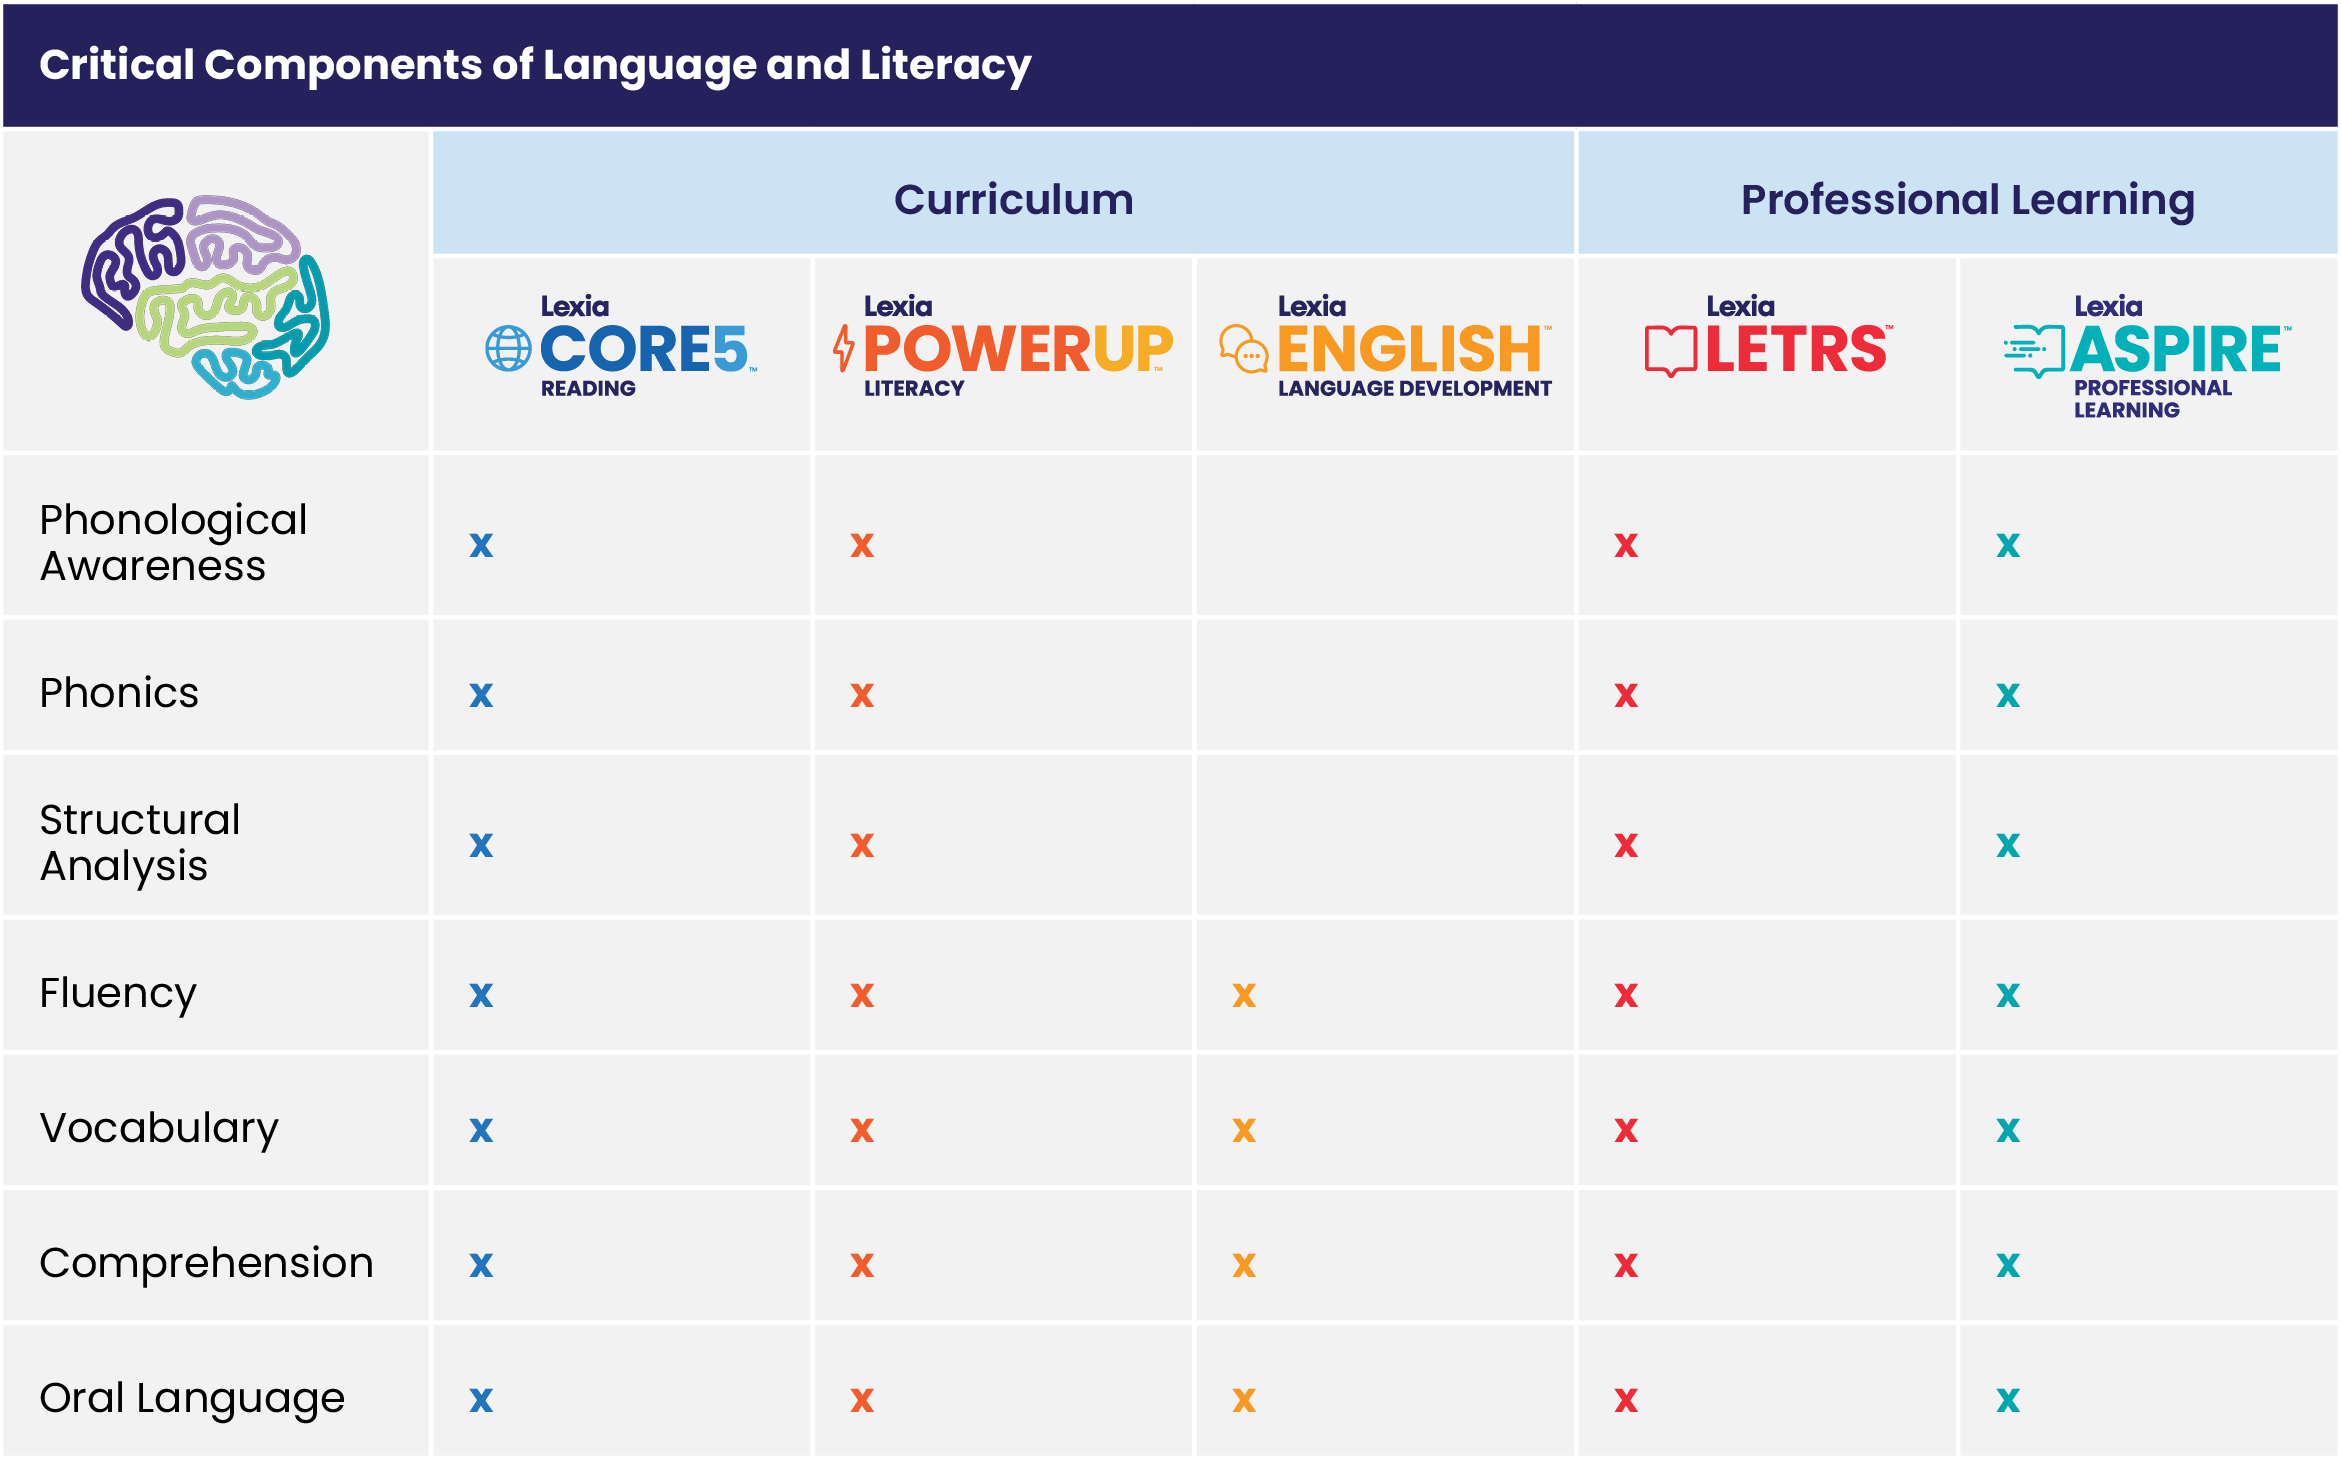 Critical Components of Language and Literacy Chart showing which Lexia products in the areas of curriculum and professional development provide solutions for the following areas: phonological awareness (Core5, PowerUp, LETRS, Aspire), phonics (Core5, PowerUp, LETRS, Aspire), structural analysis (Core5, PowerUp, LETRS, Aspire), fluency (Core5, PowerUp, LETRS, Aspire), vocabulary (Core5, PowerUp, Lexia English, LETRS, Aspire), comprehension (Core5, PowerUp, Lexia English, LETRS, Aspire), and oral language (Core5, Lexia English, LETRS, Aspire)